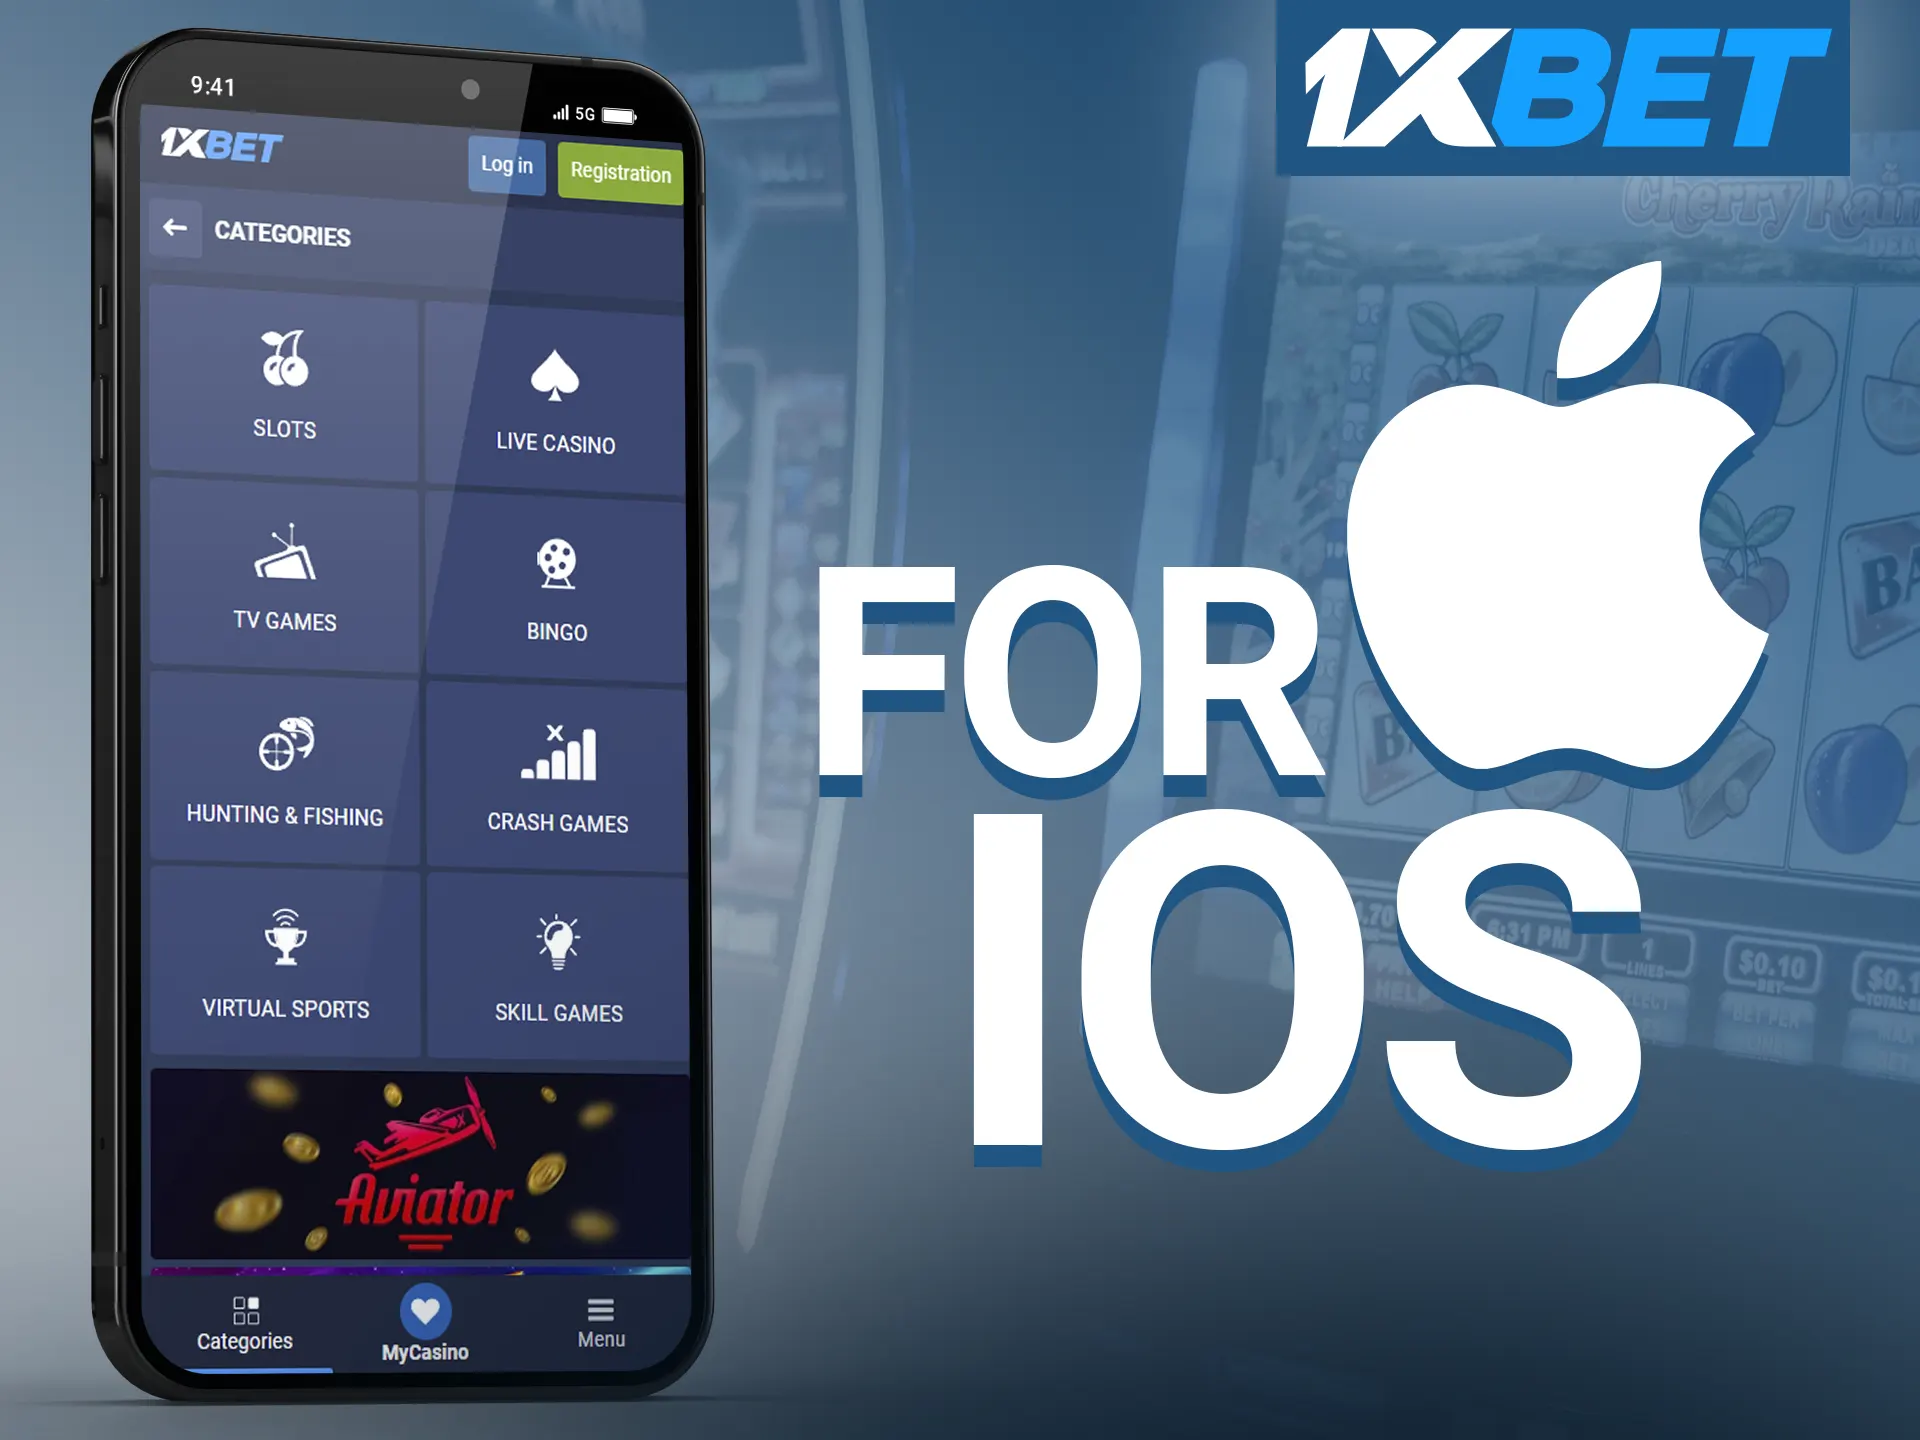 Install the 1xbet app on your iOS device.